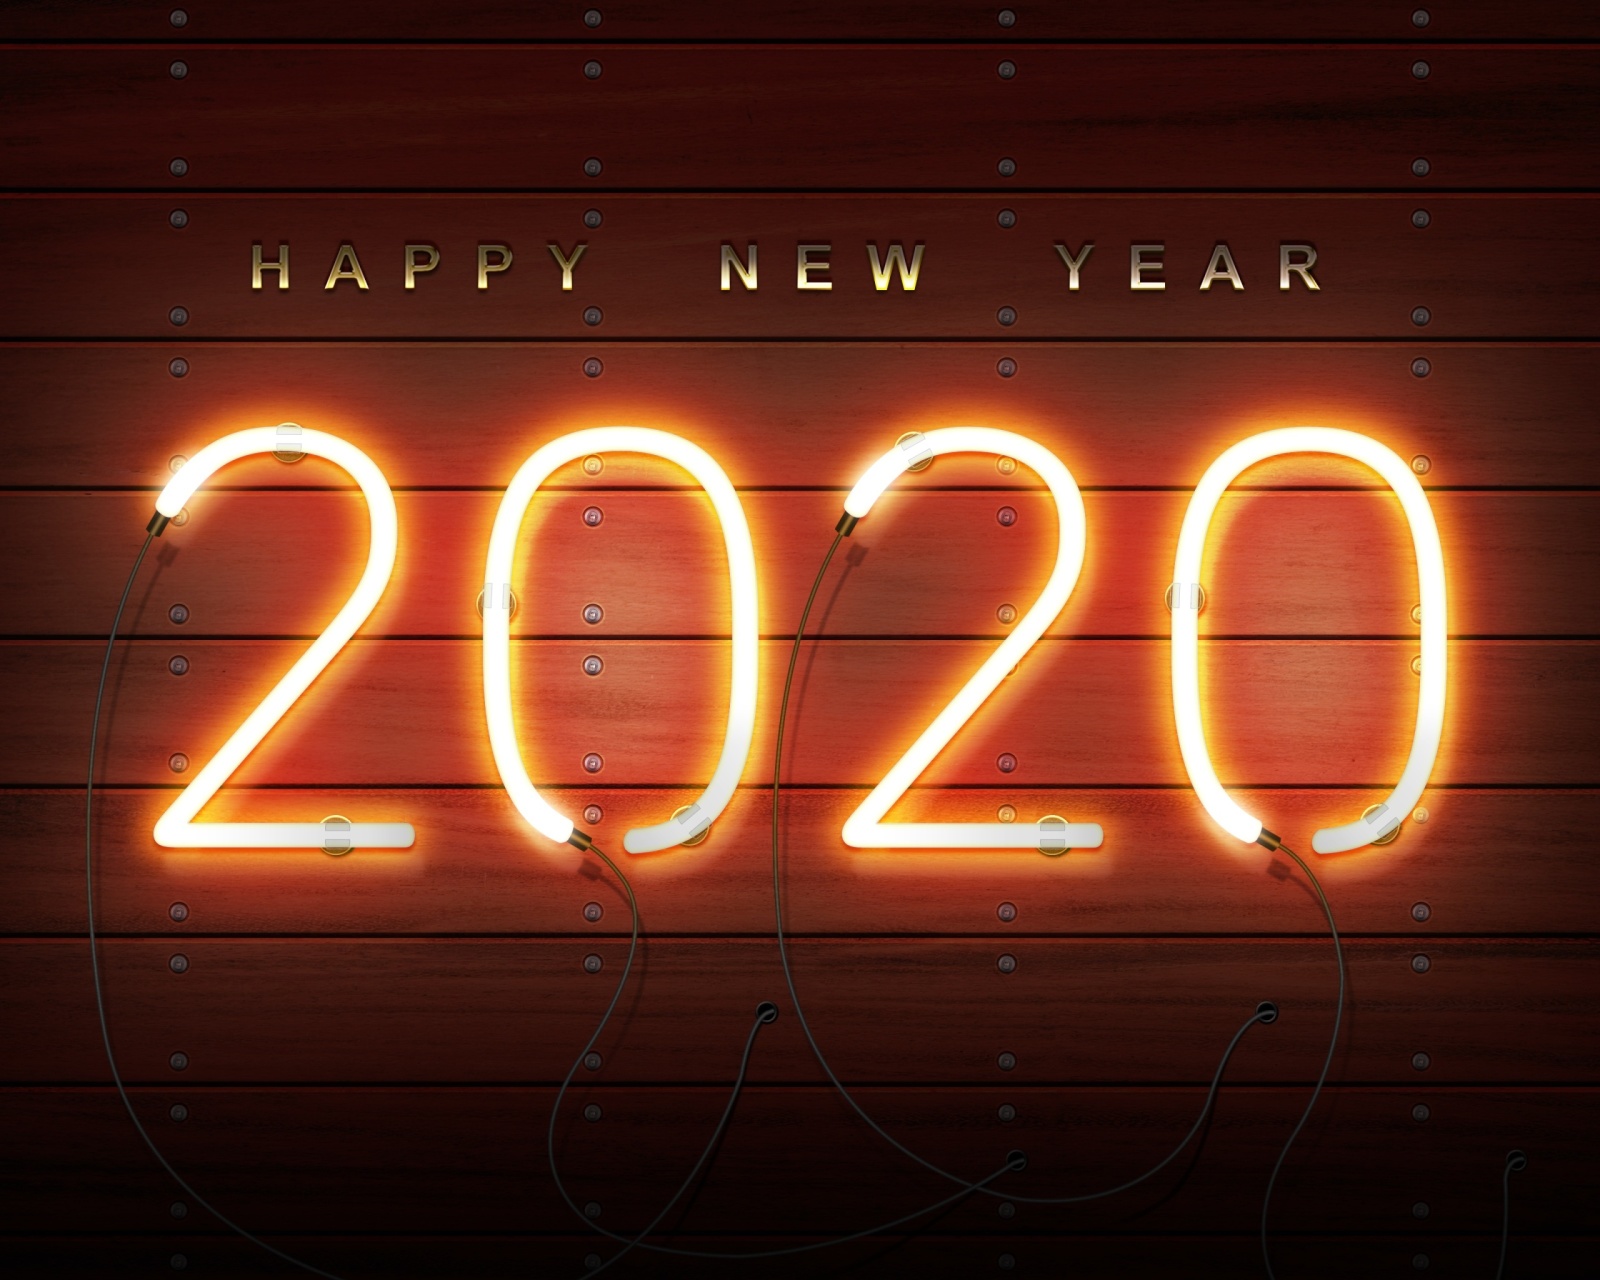 Happy New Year 2020 Wishes wallpaper 1600x1280